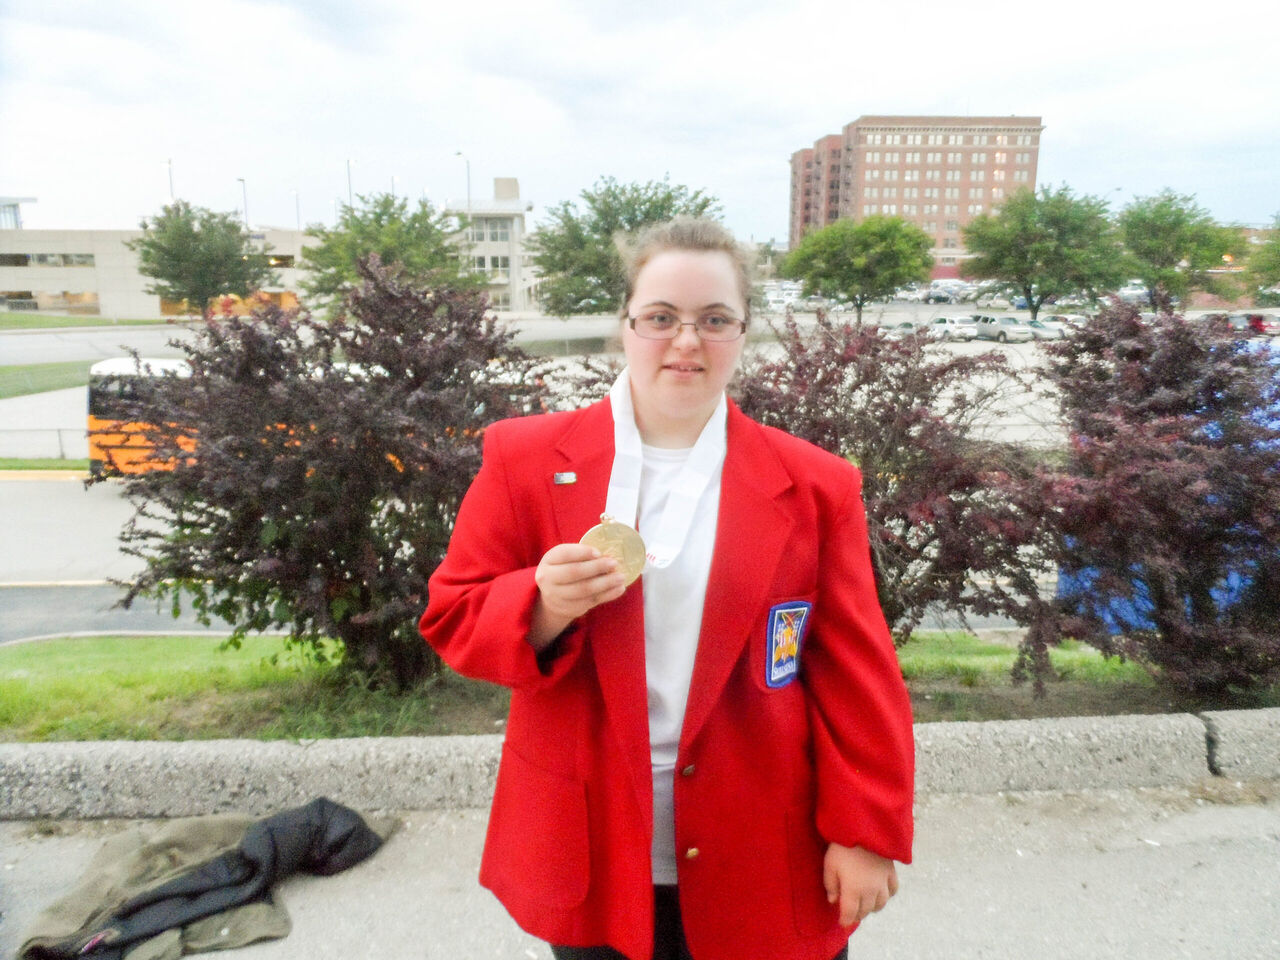 Food Service student Audrey Seltzer took 1st place in Action Skills.